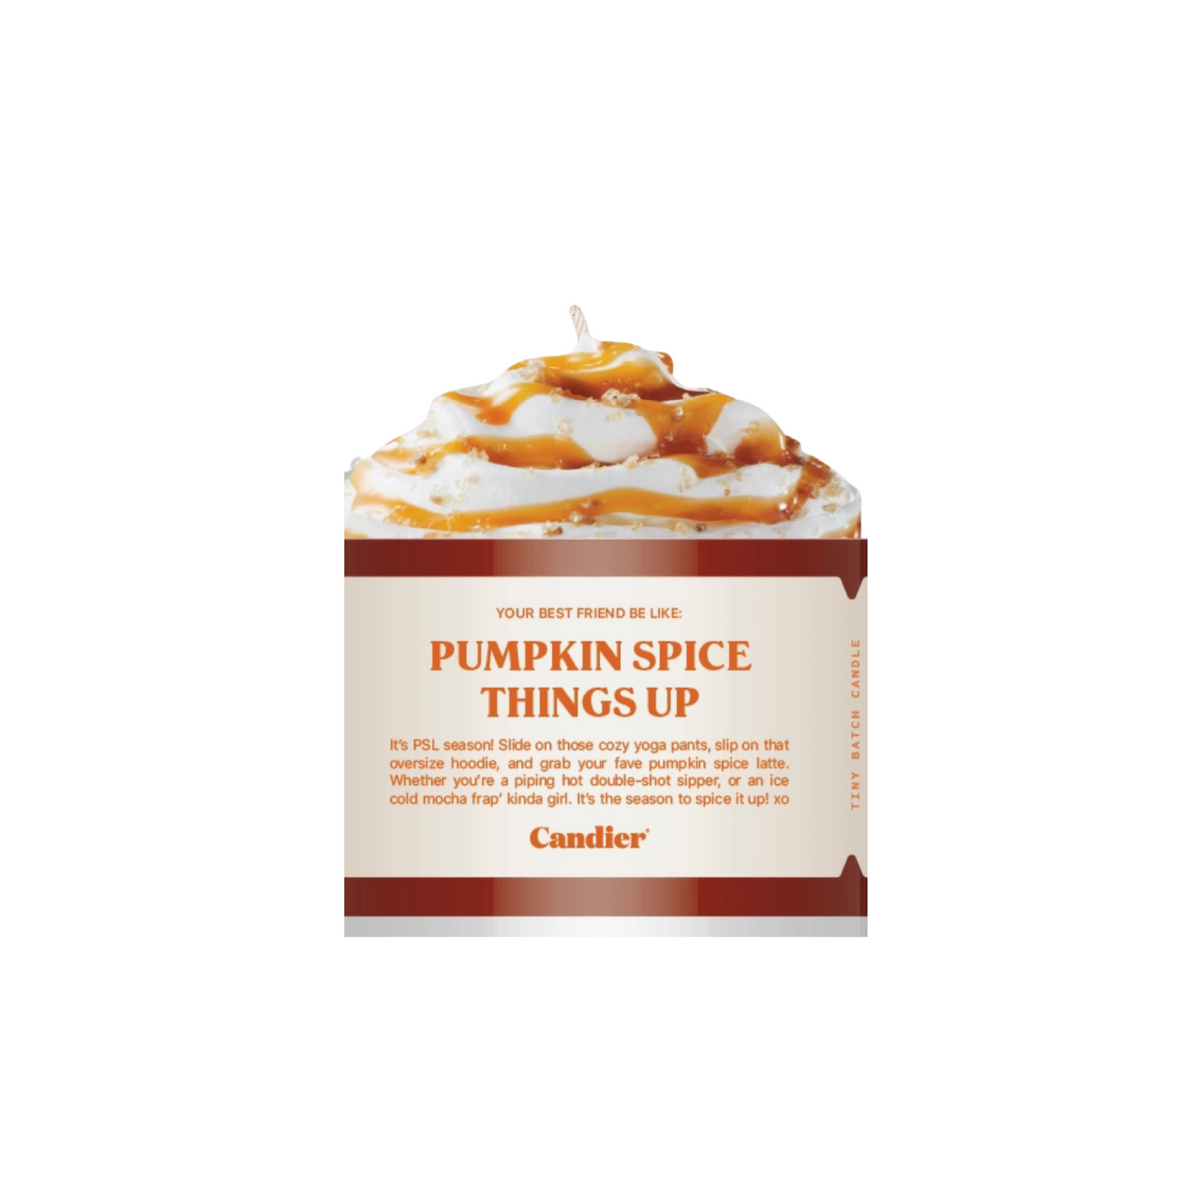 Pumpkin Spice Things Up